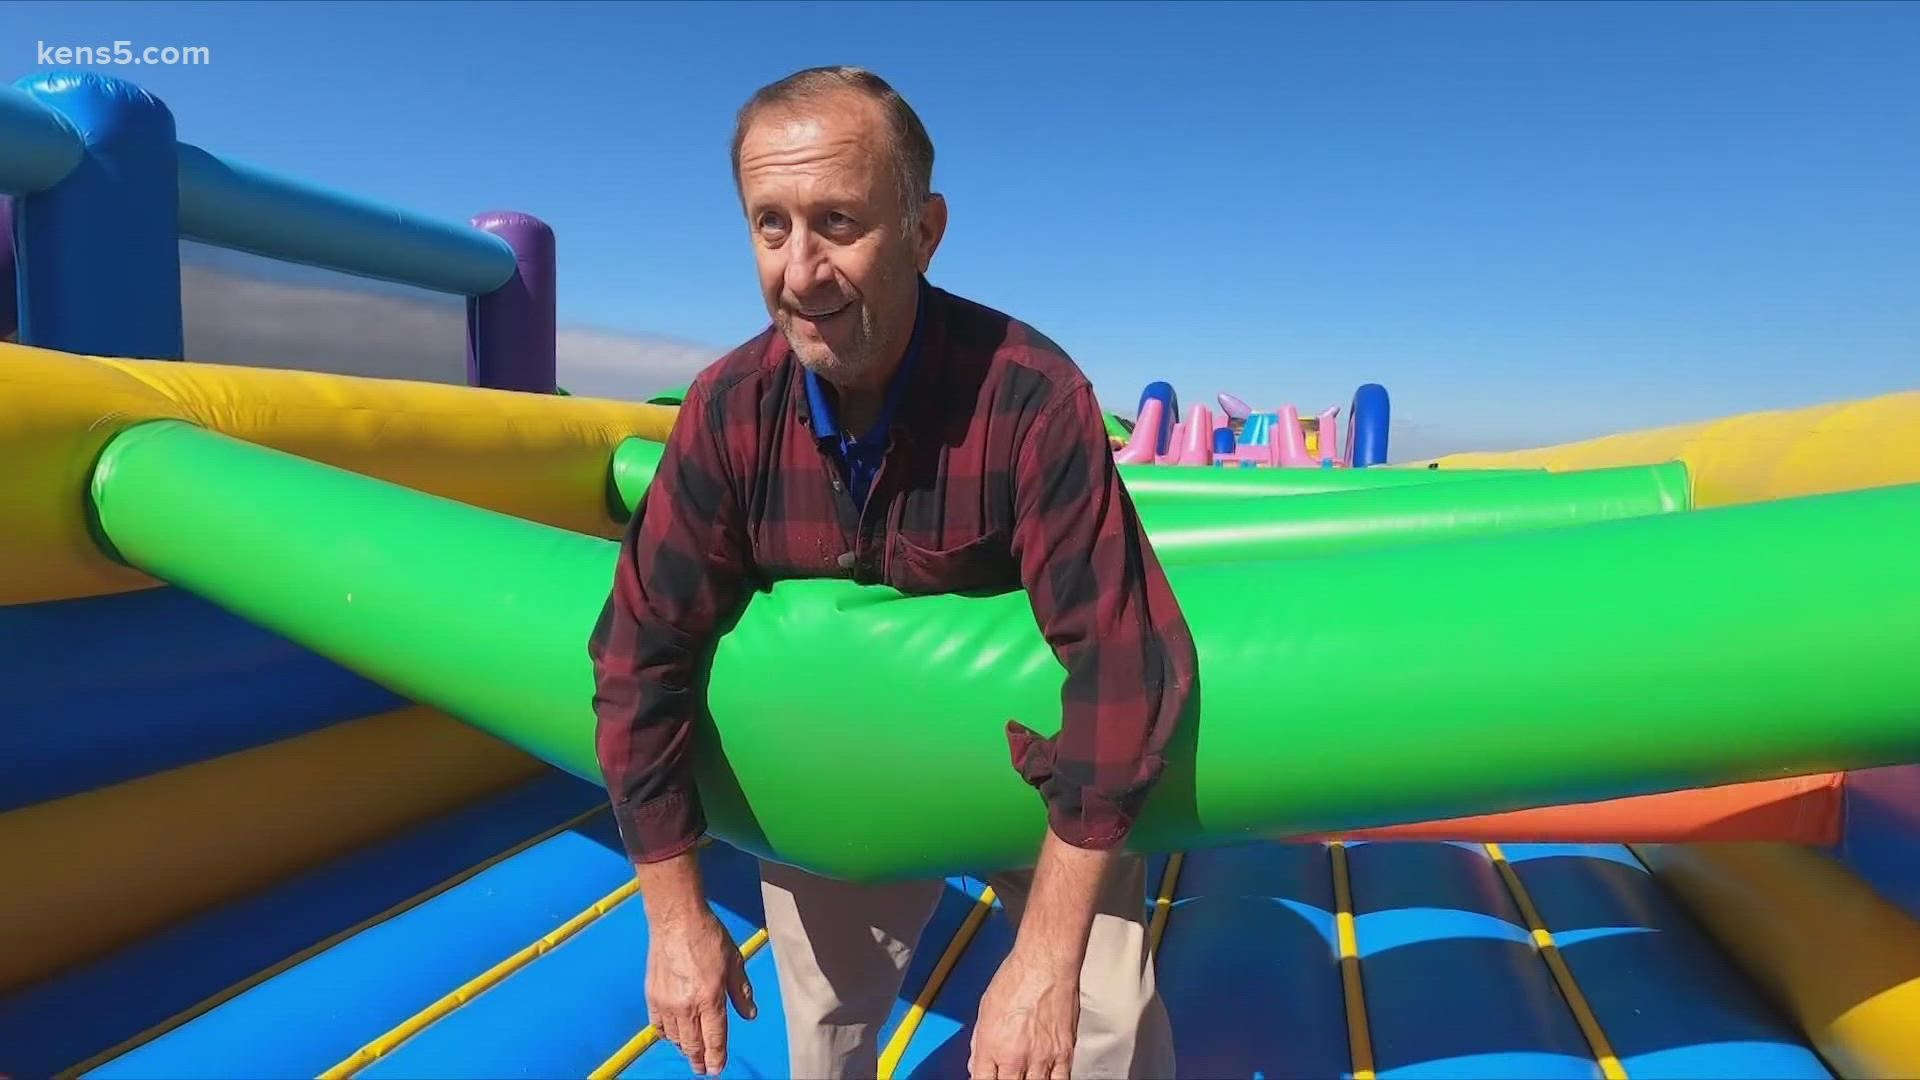 The Big Bounce America castle is 13,000 square feet of bouncing, sliding, climbing fun!